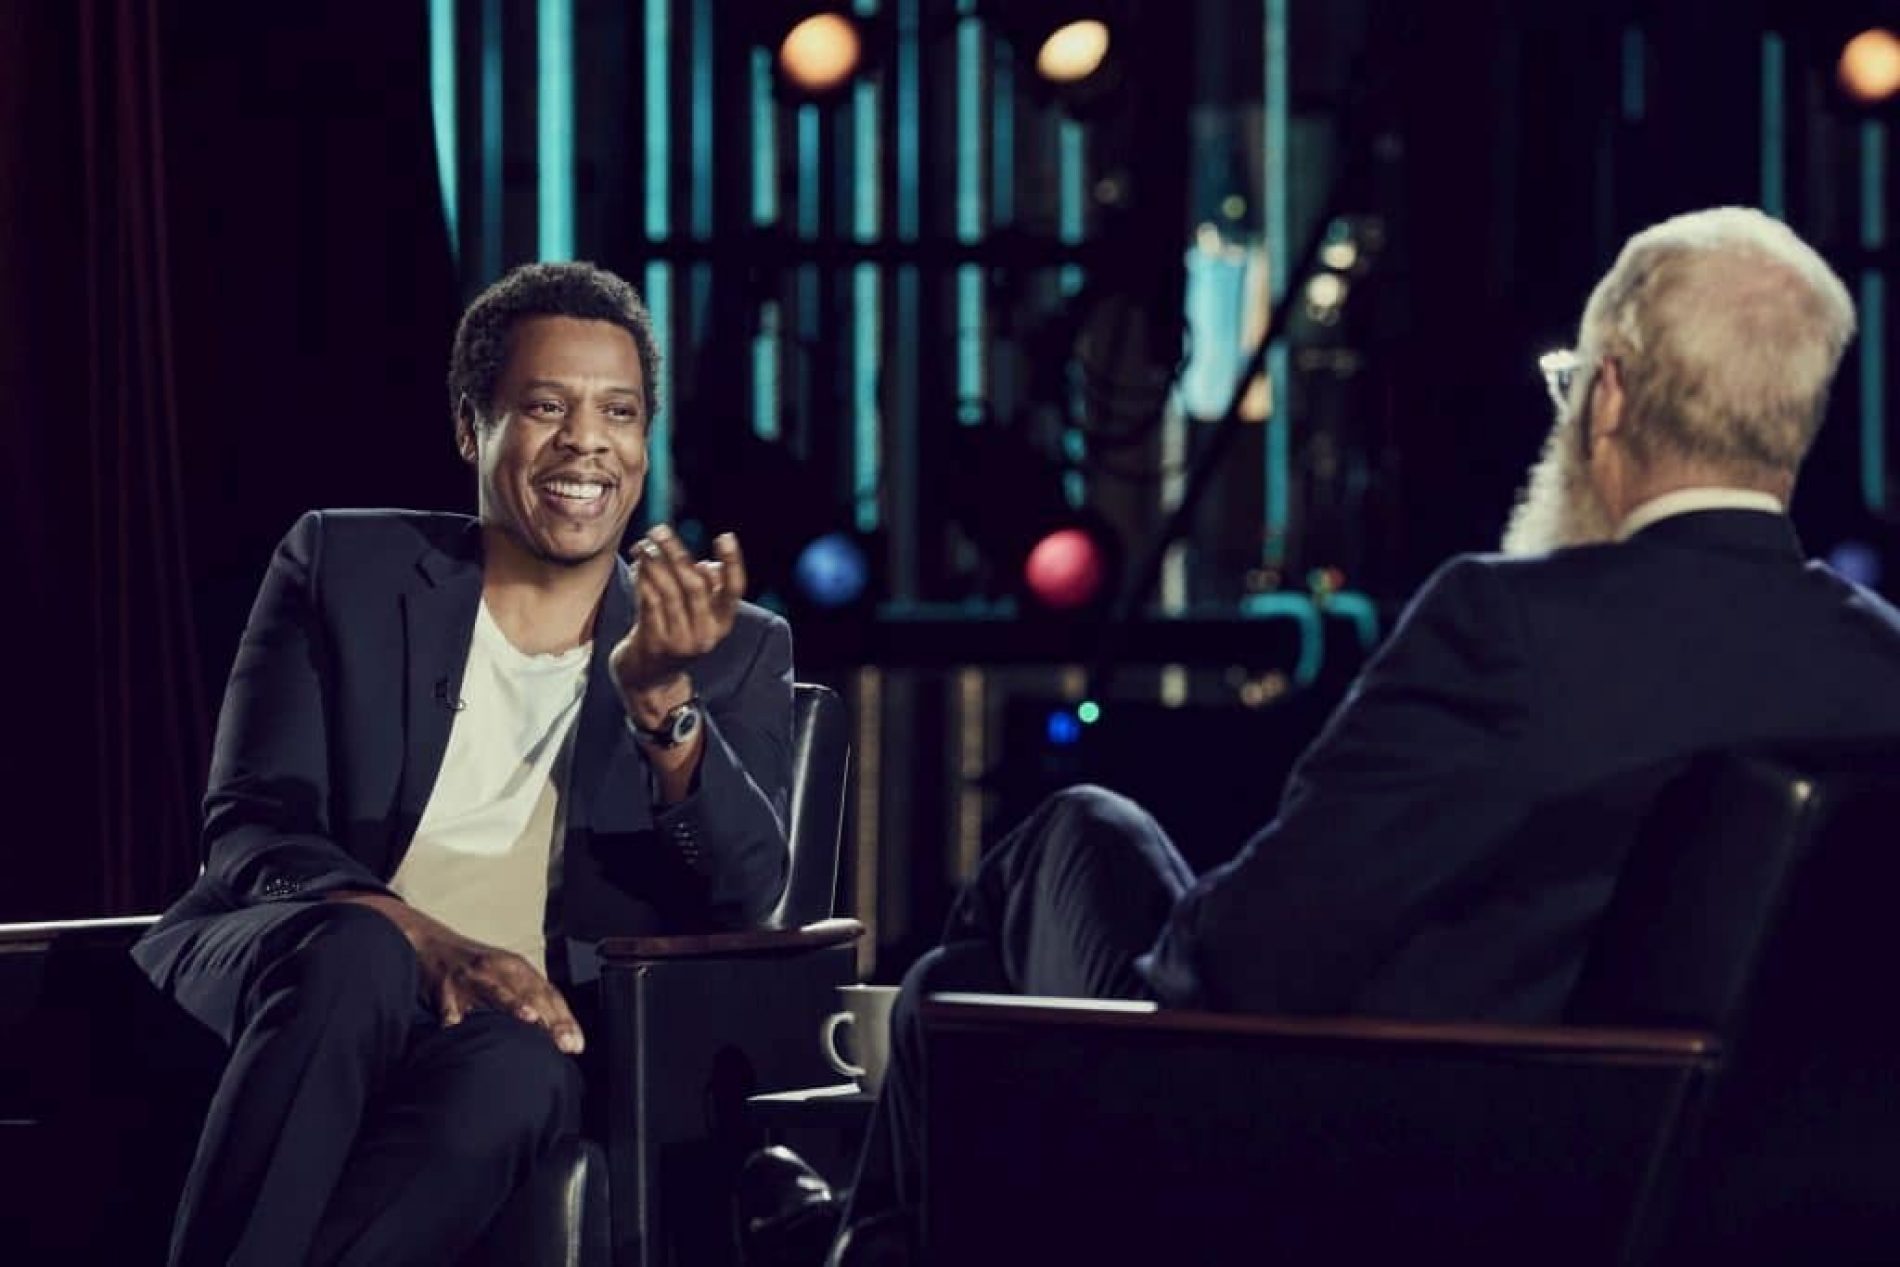 Jay-Z’s Reaction To His Mother’s Coming Out Is What LGBTQ People Hope For With Their Own Families